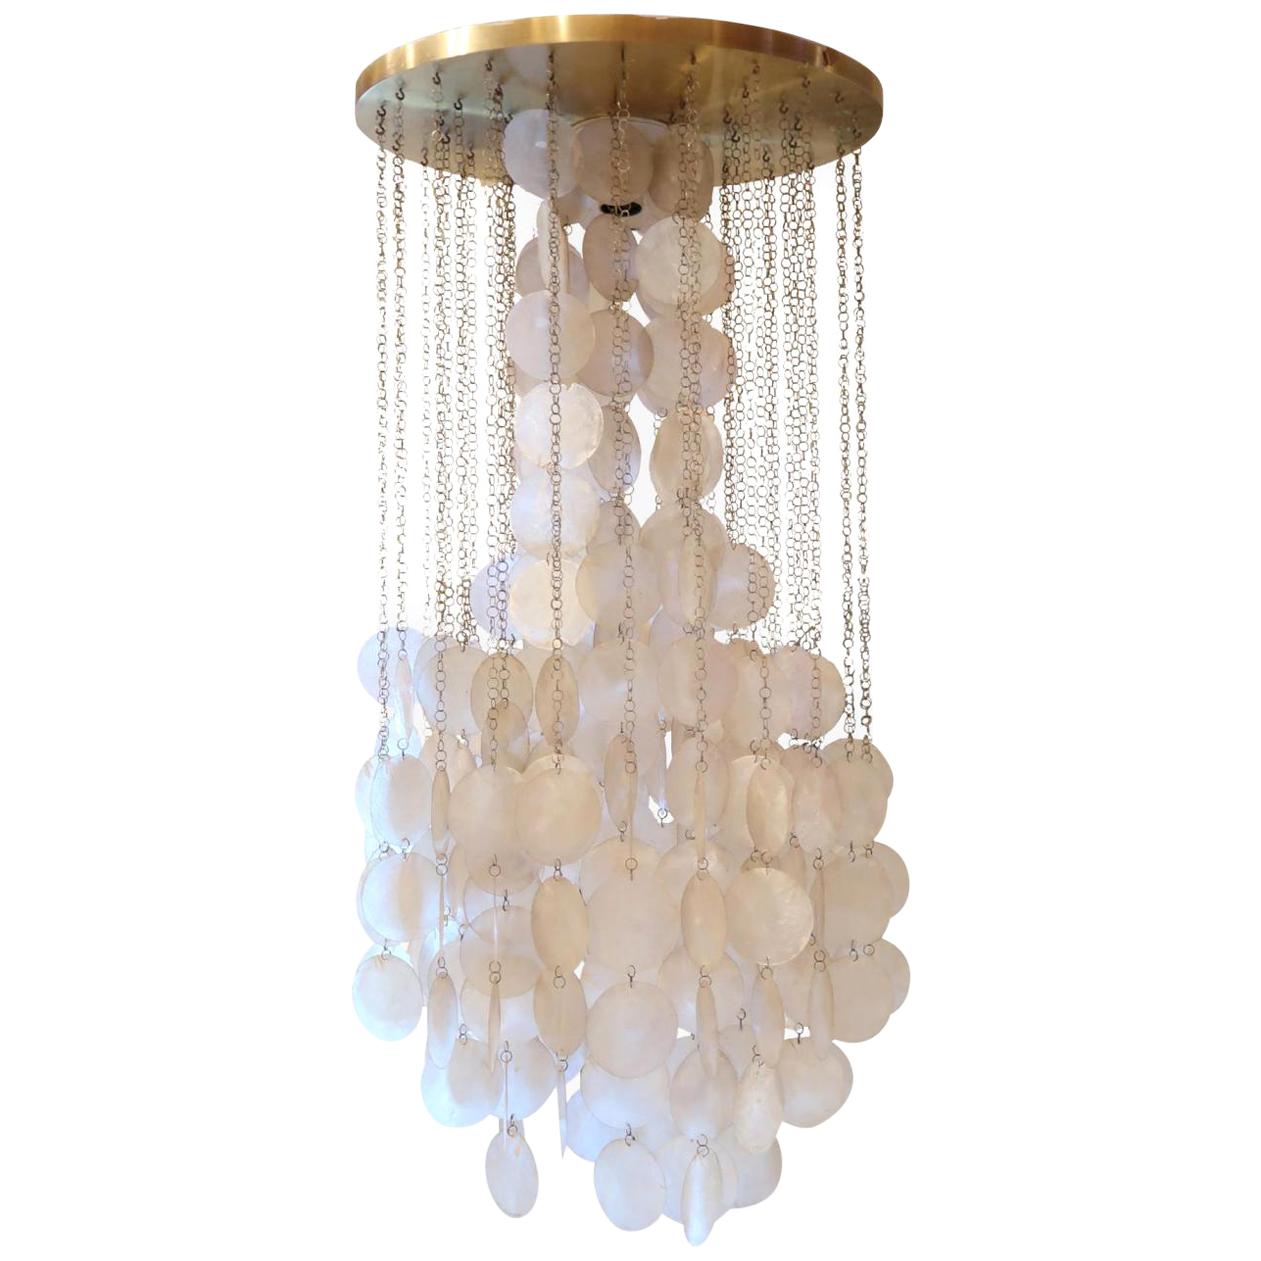 Verner Panton Brass and Mother of Pearl Midcentury Danish Ceiling Lamp, 1960 For Sale